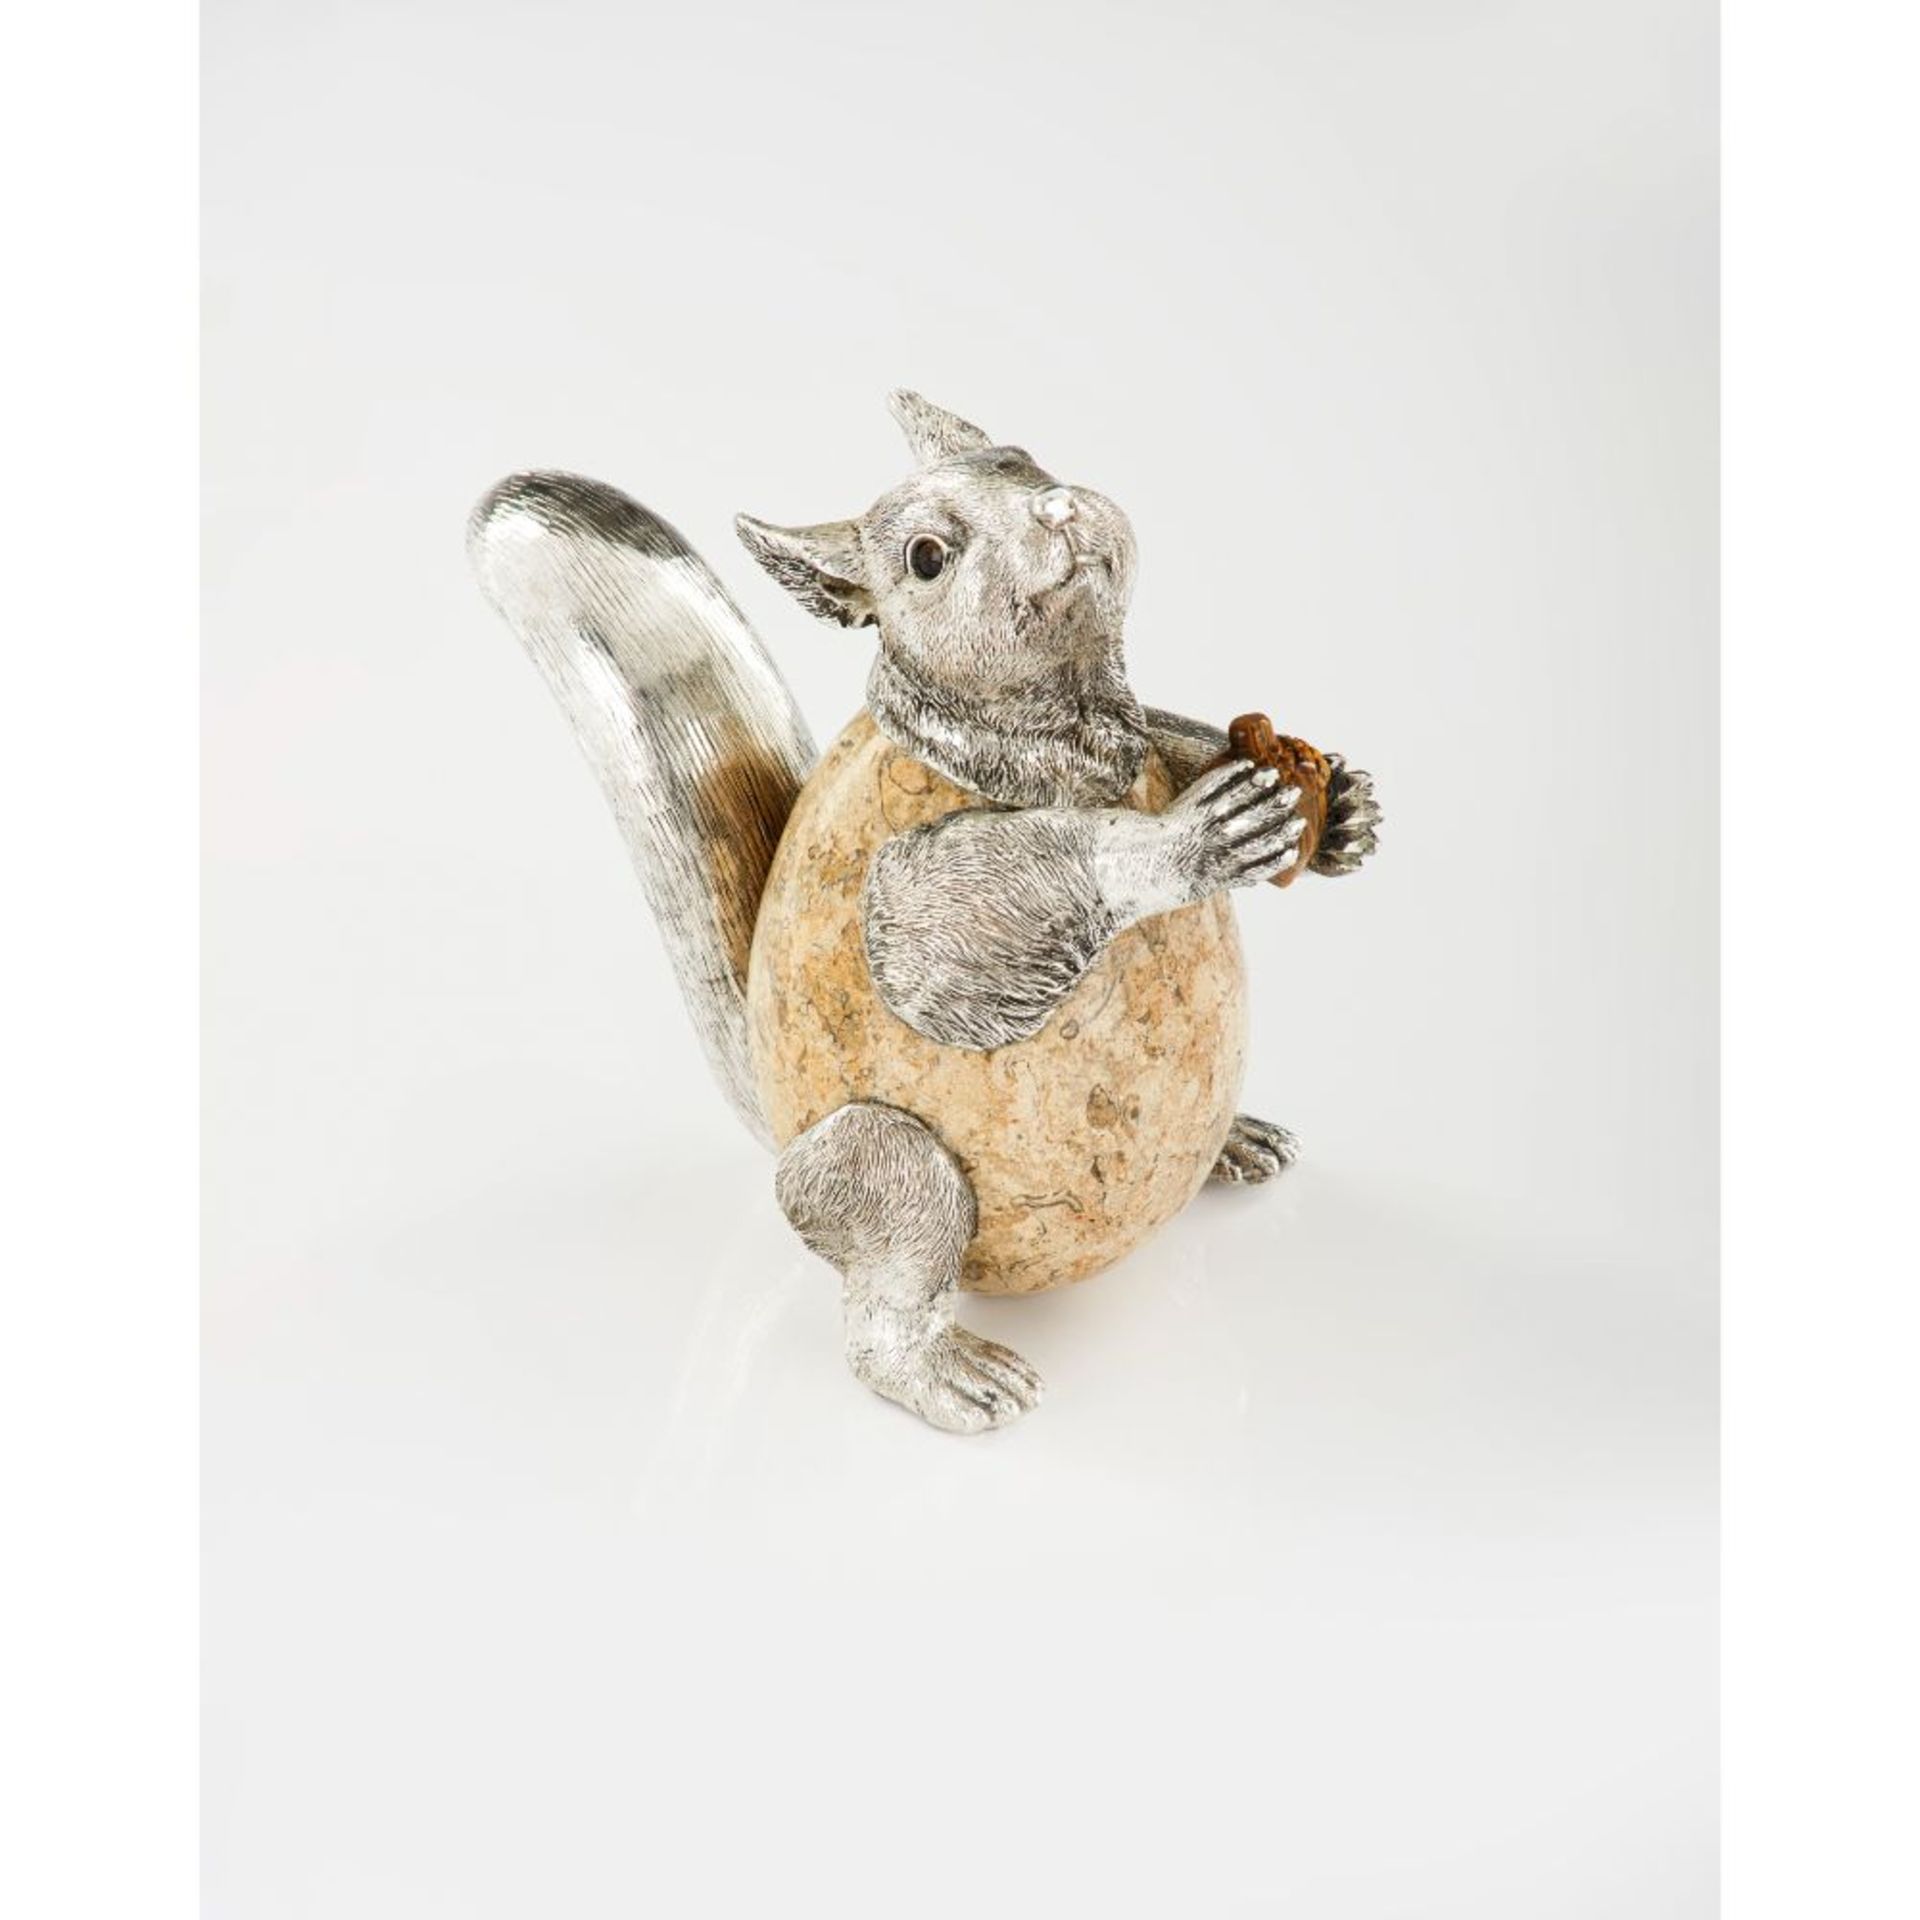 A squirrel, Silver 925/000 sculpture, Engraved decoration, Hardstone body with tiger's eye carved